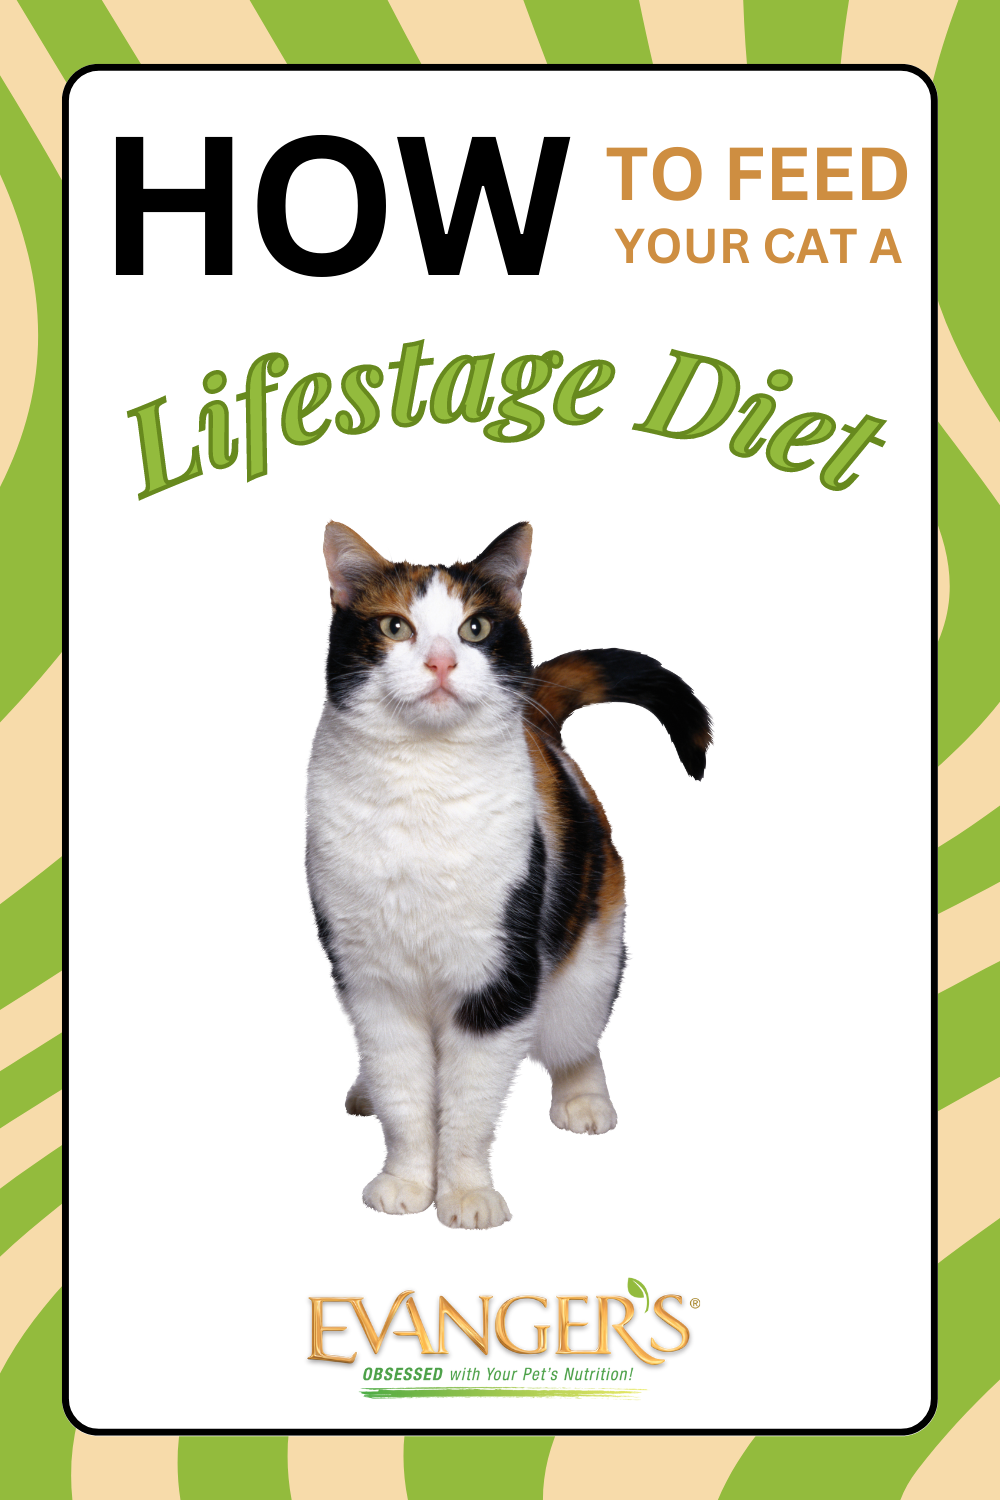 How to Feed Your Cat a Lifestage Diet